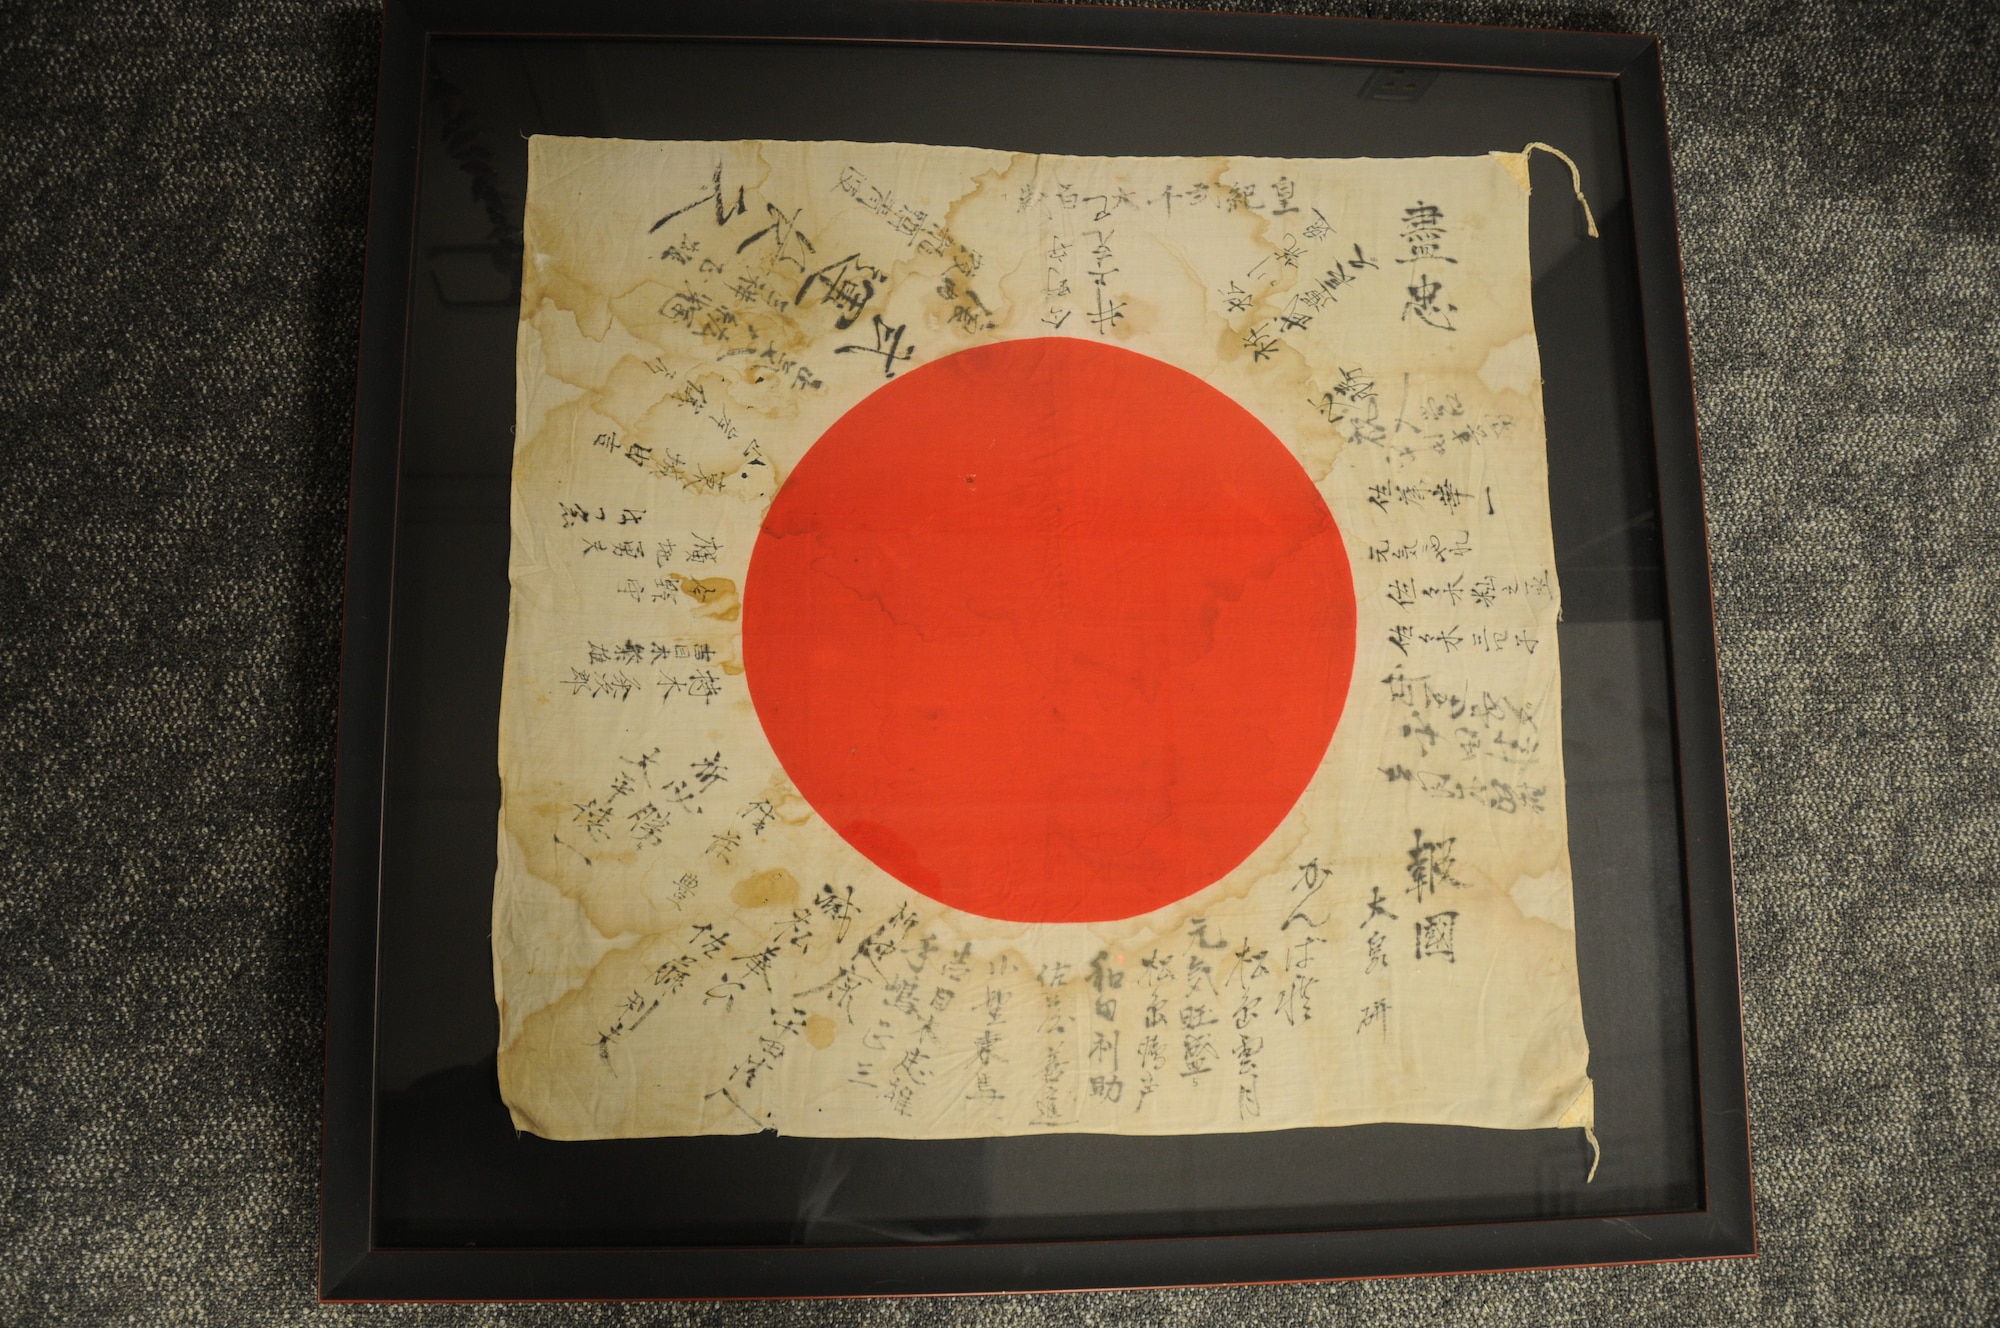 Fitted in a frame for preservation, Dr. Jordan is both haunted and intrigued by the tattered Japanese war flag.